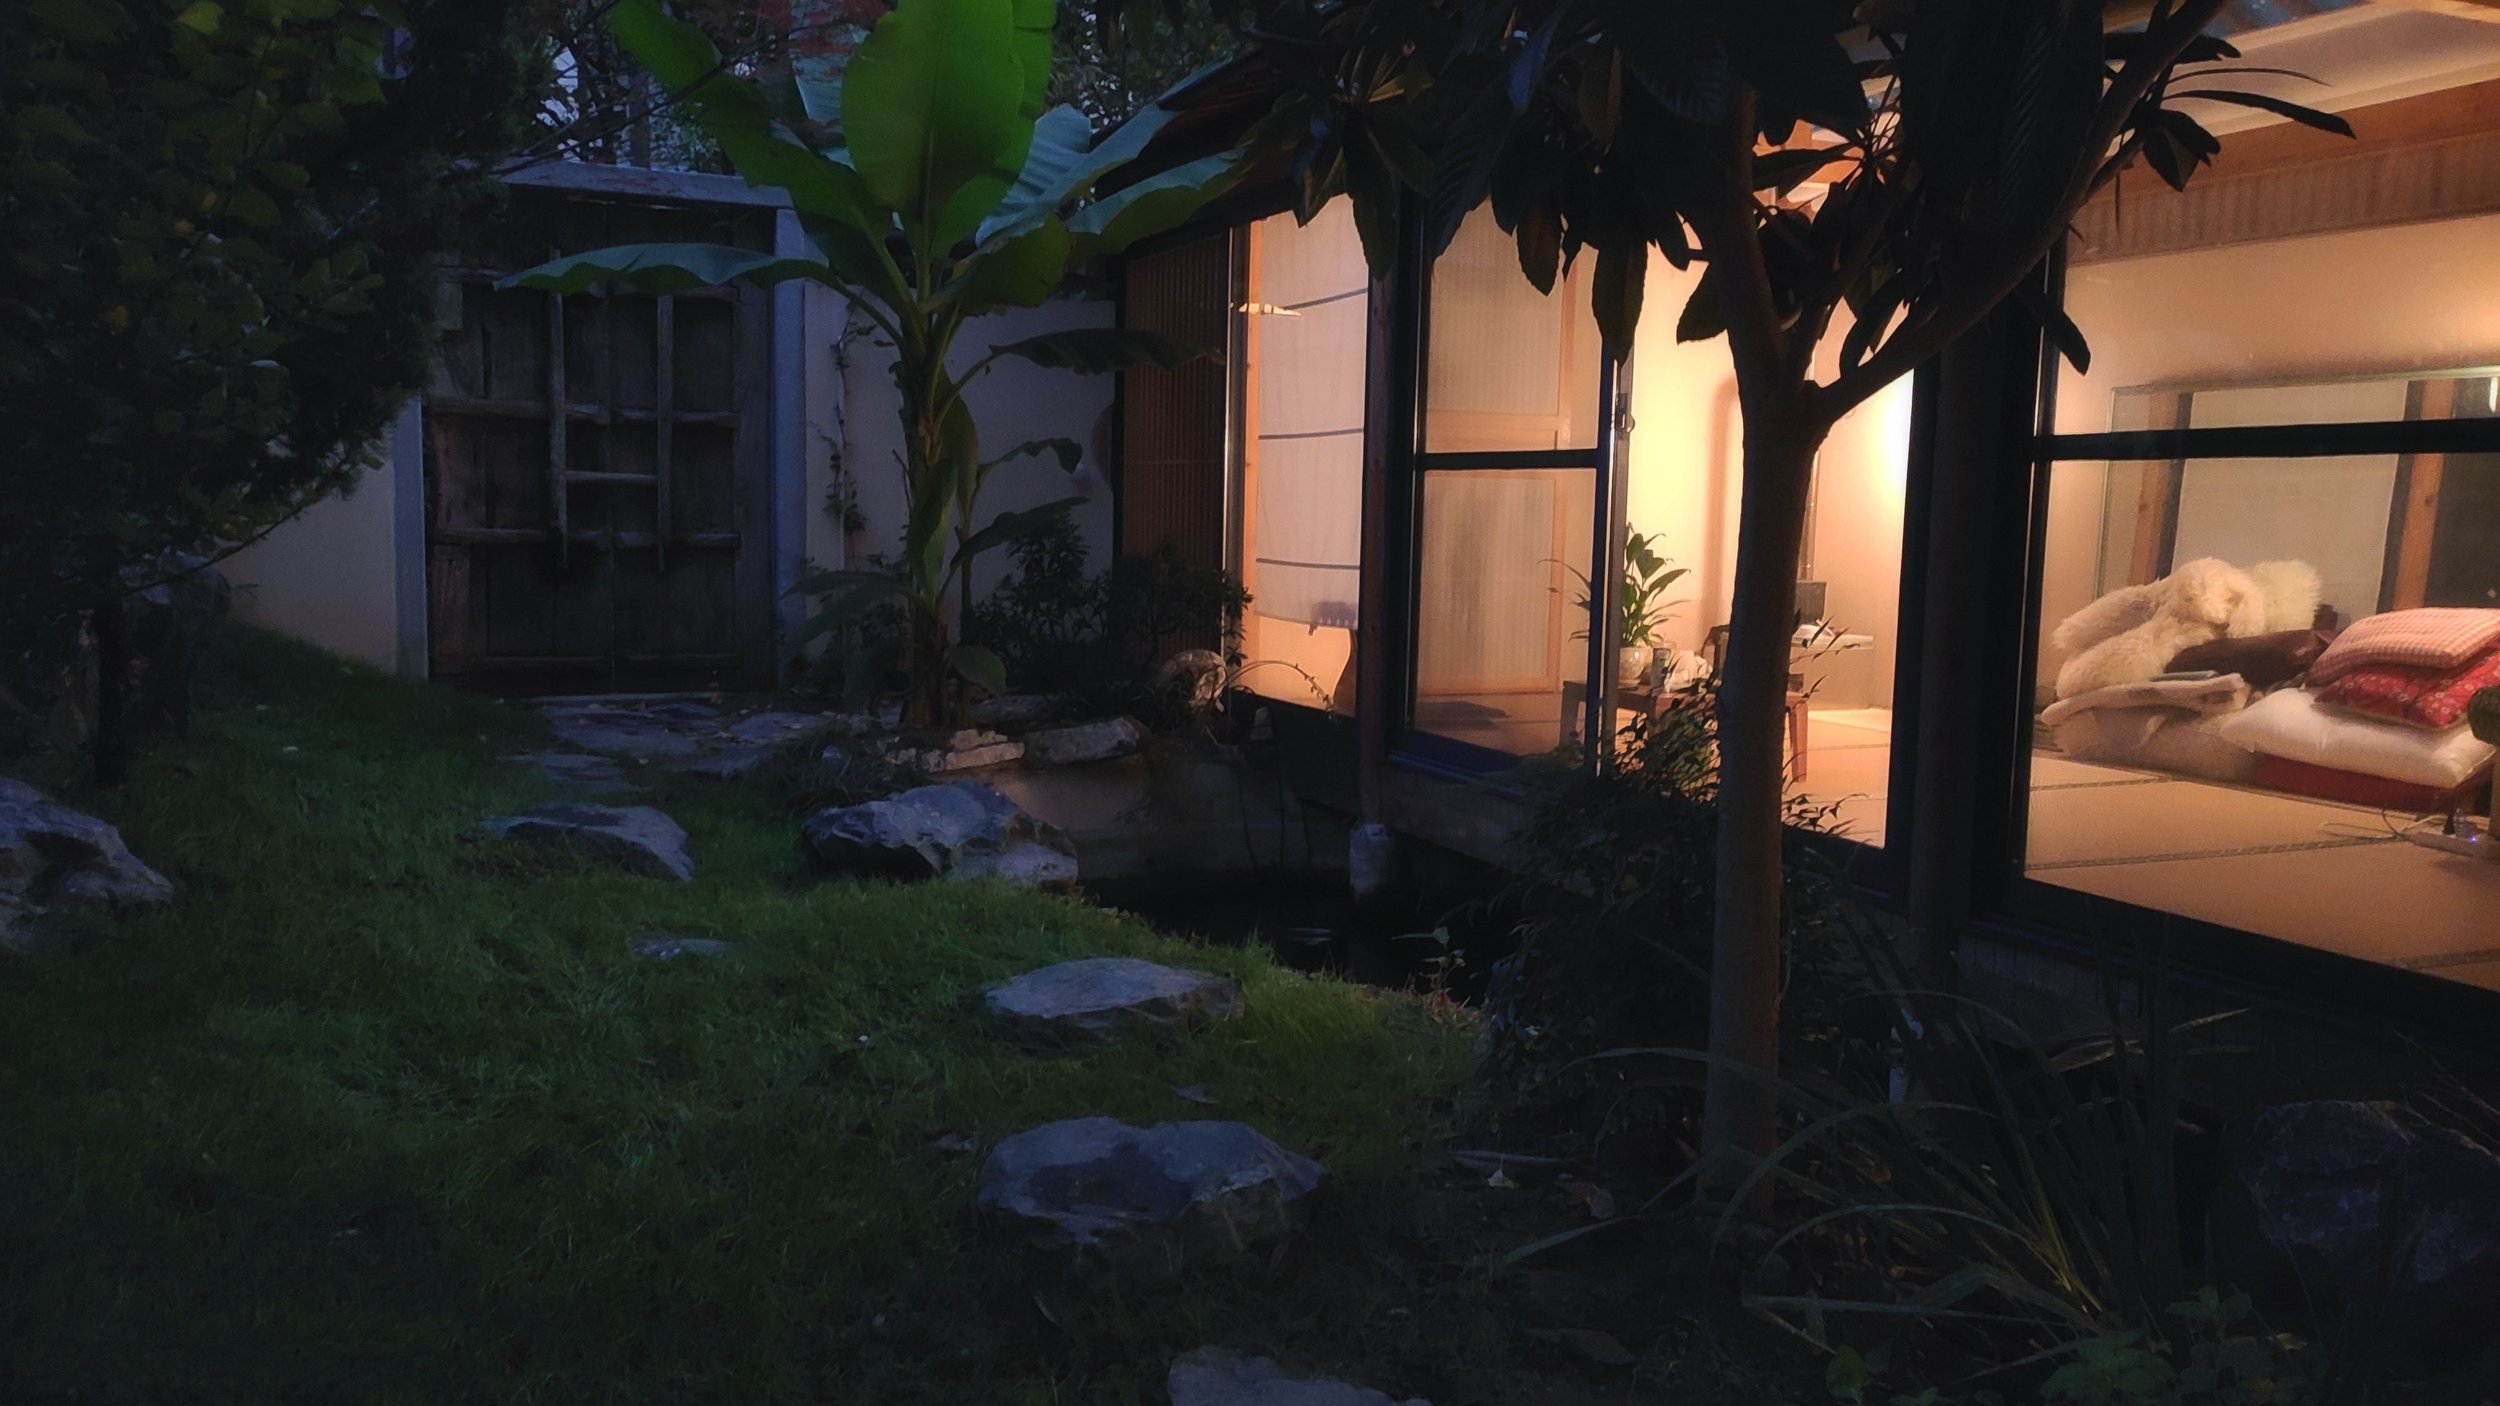 PHOTO, EXTENSION AT DUSK FROM GARDEN